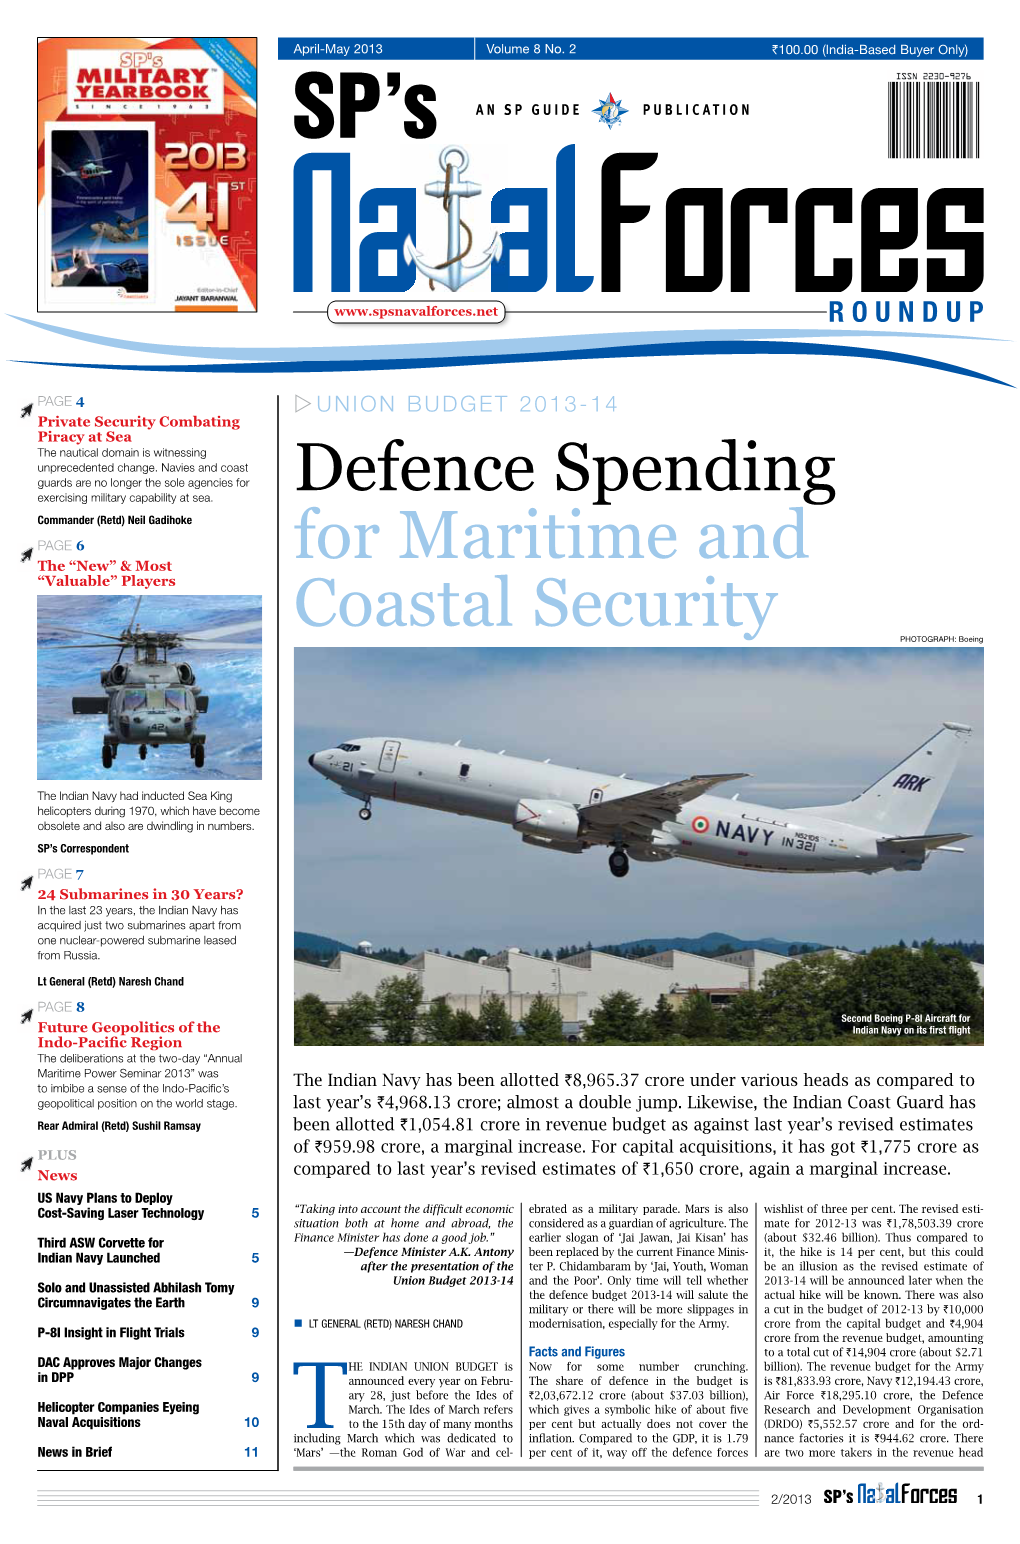 Defence Spending for Maritime and Coastal Security